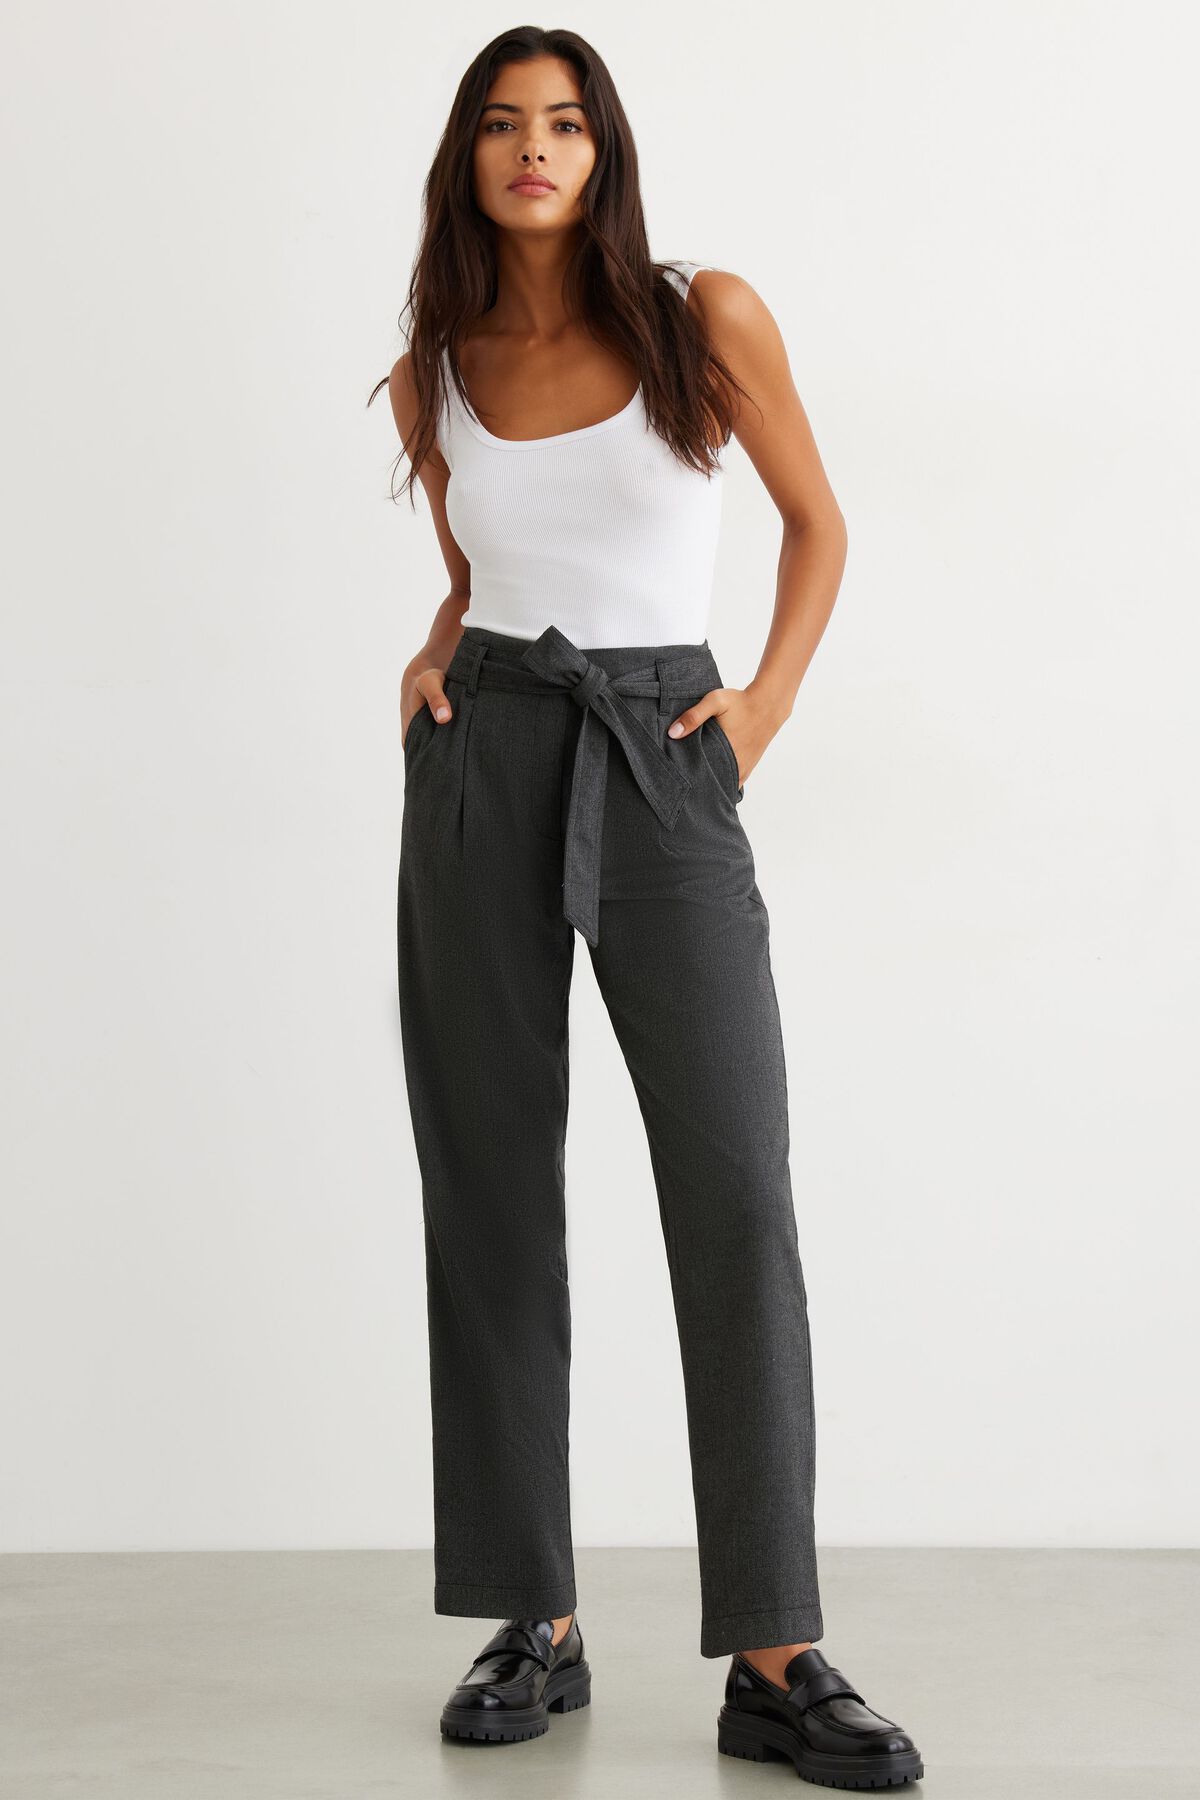 Dynamite Paperbag Pant With Belt. 1